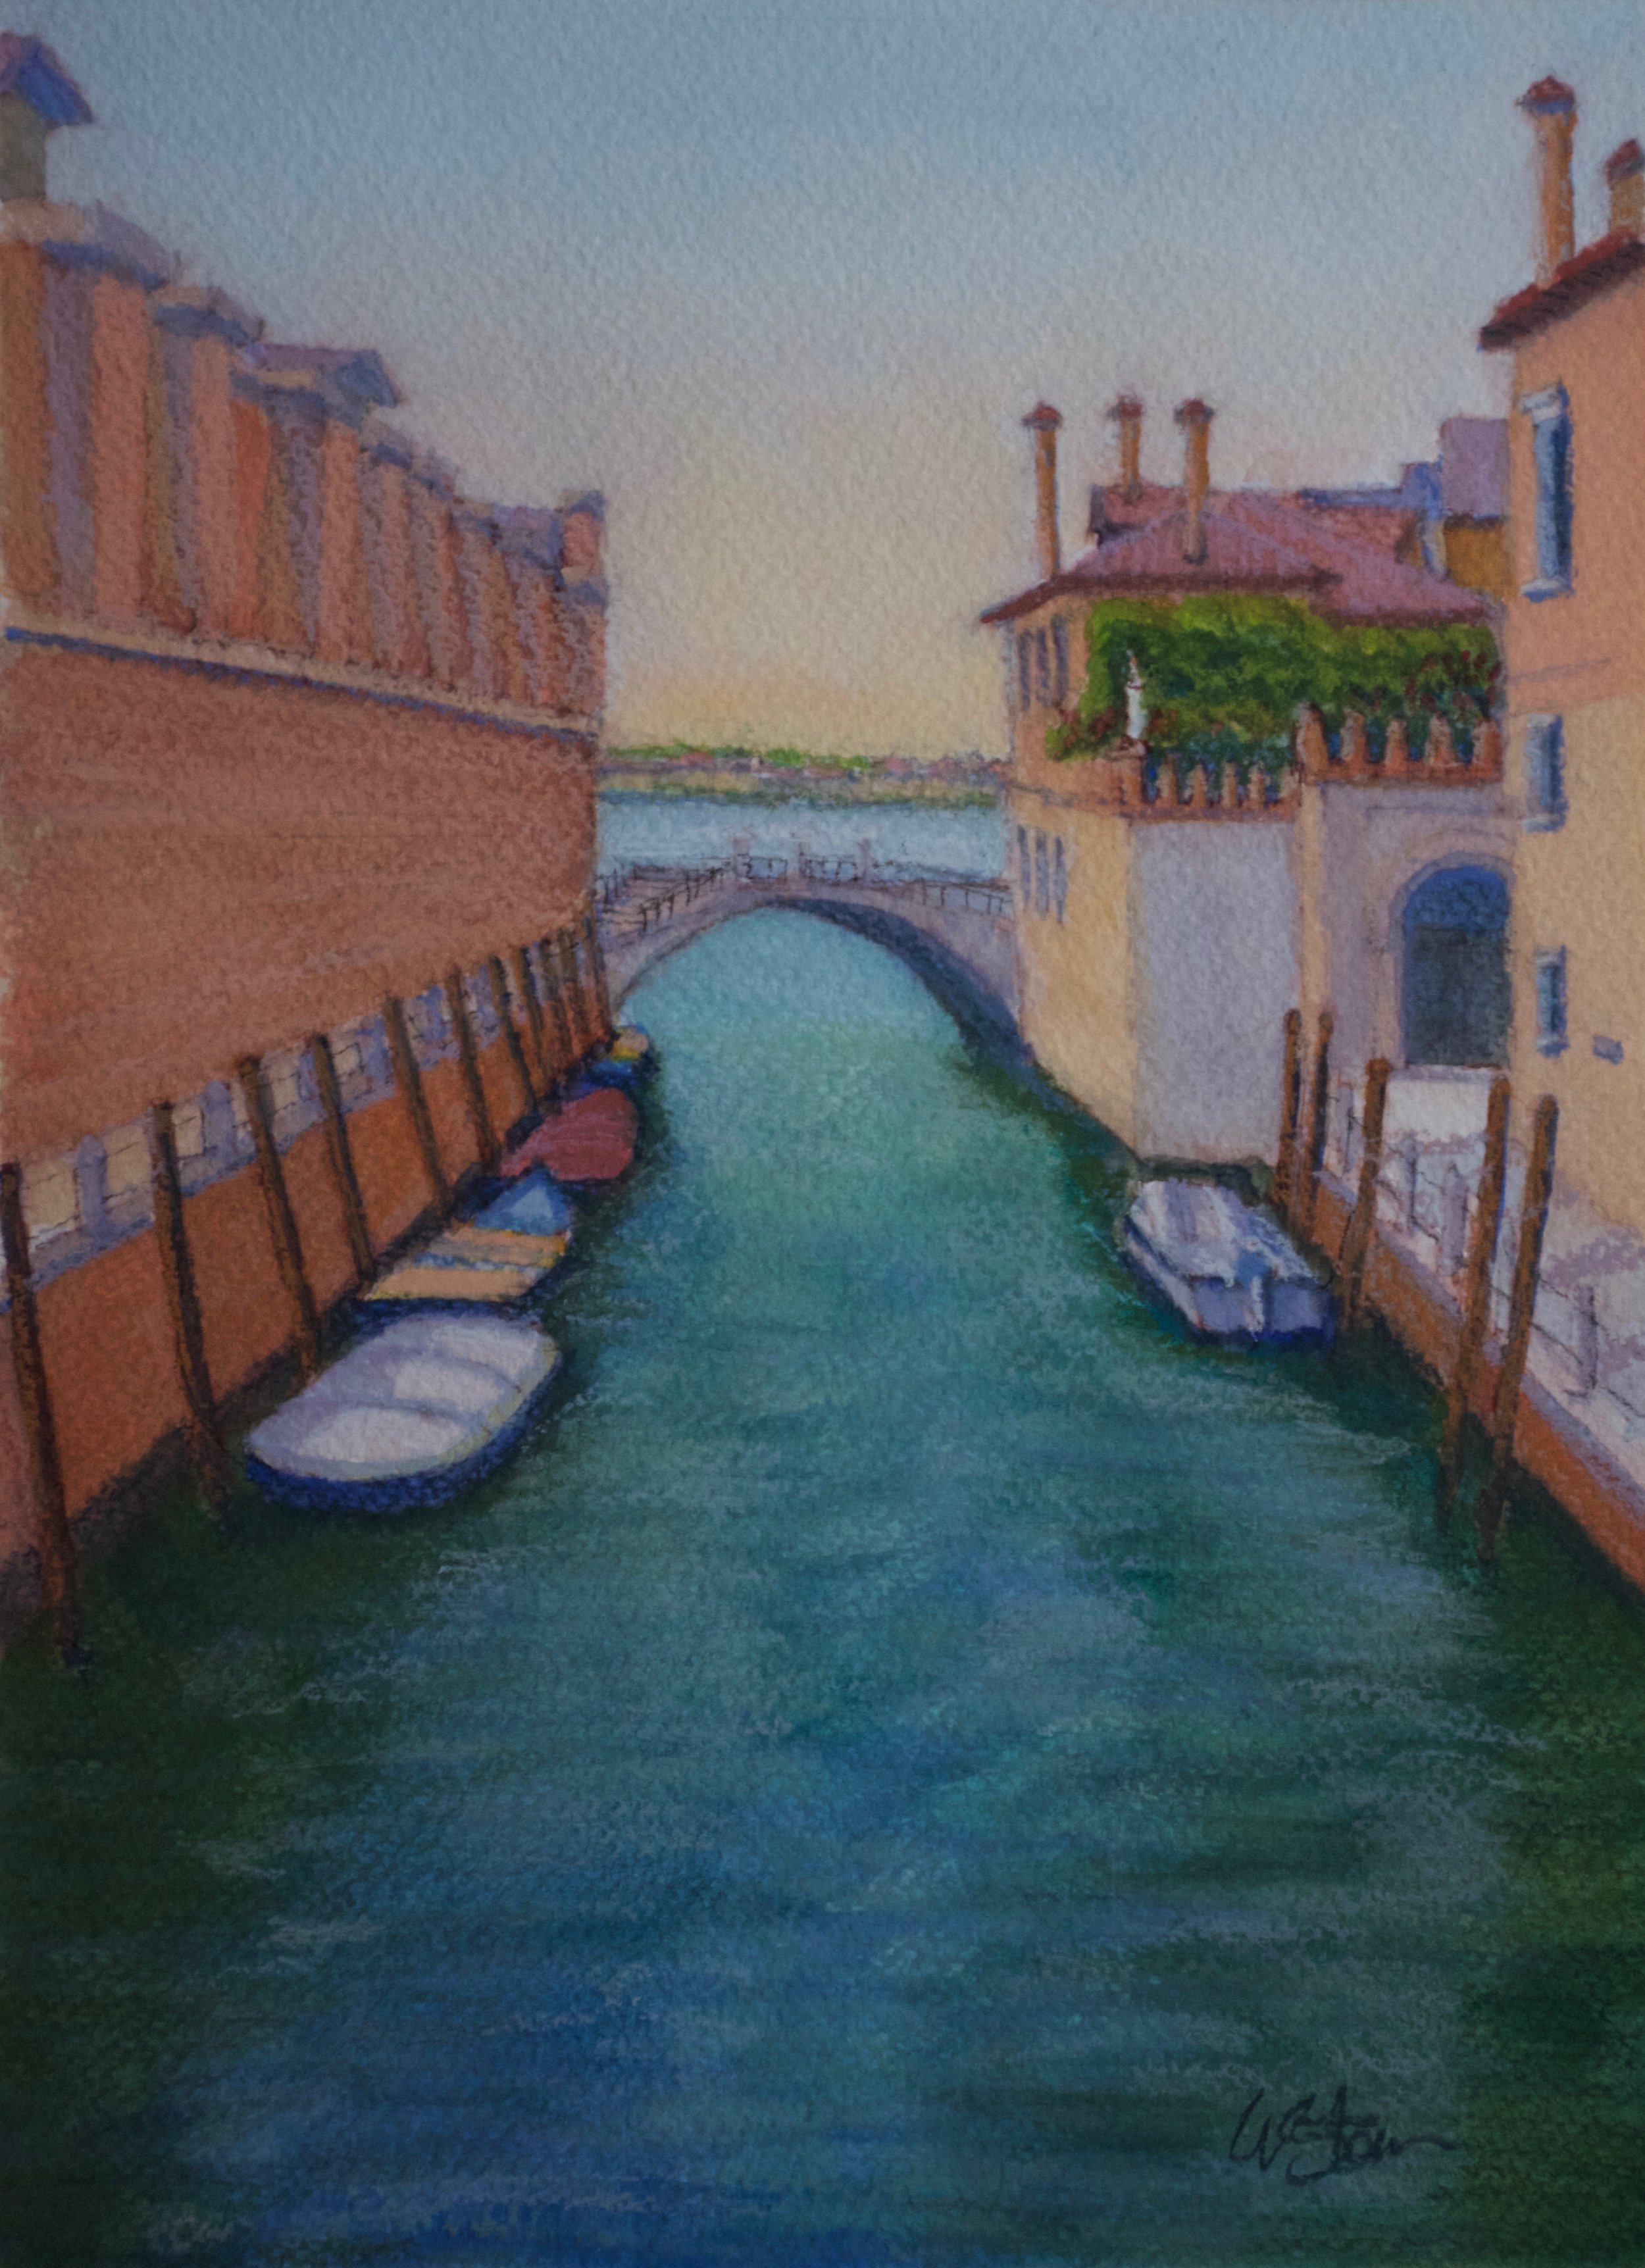  Dorsoduro Canal, 2018  pastel on paper, 8x11 inches 